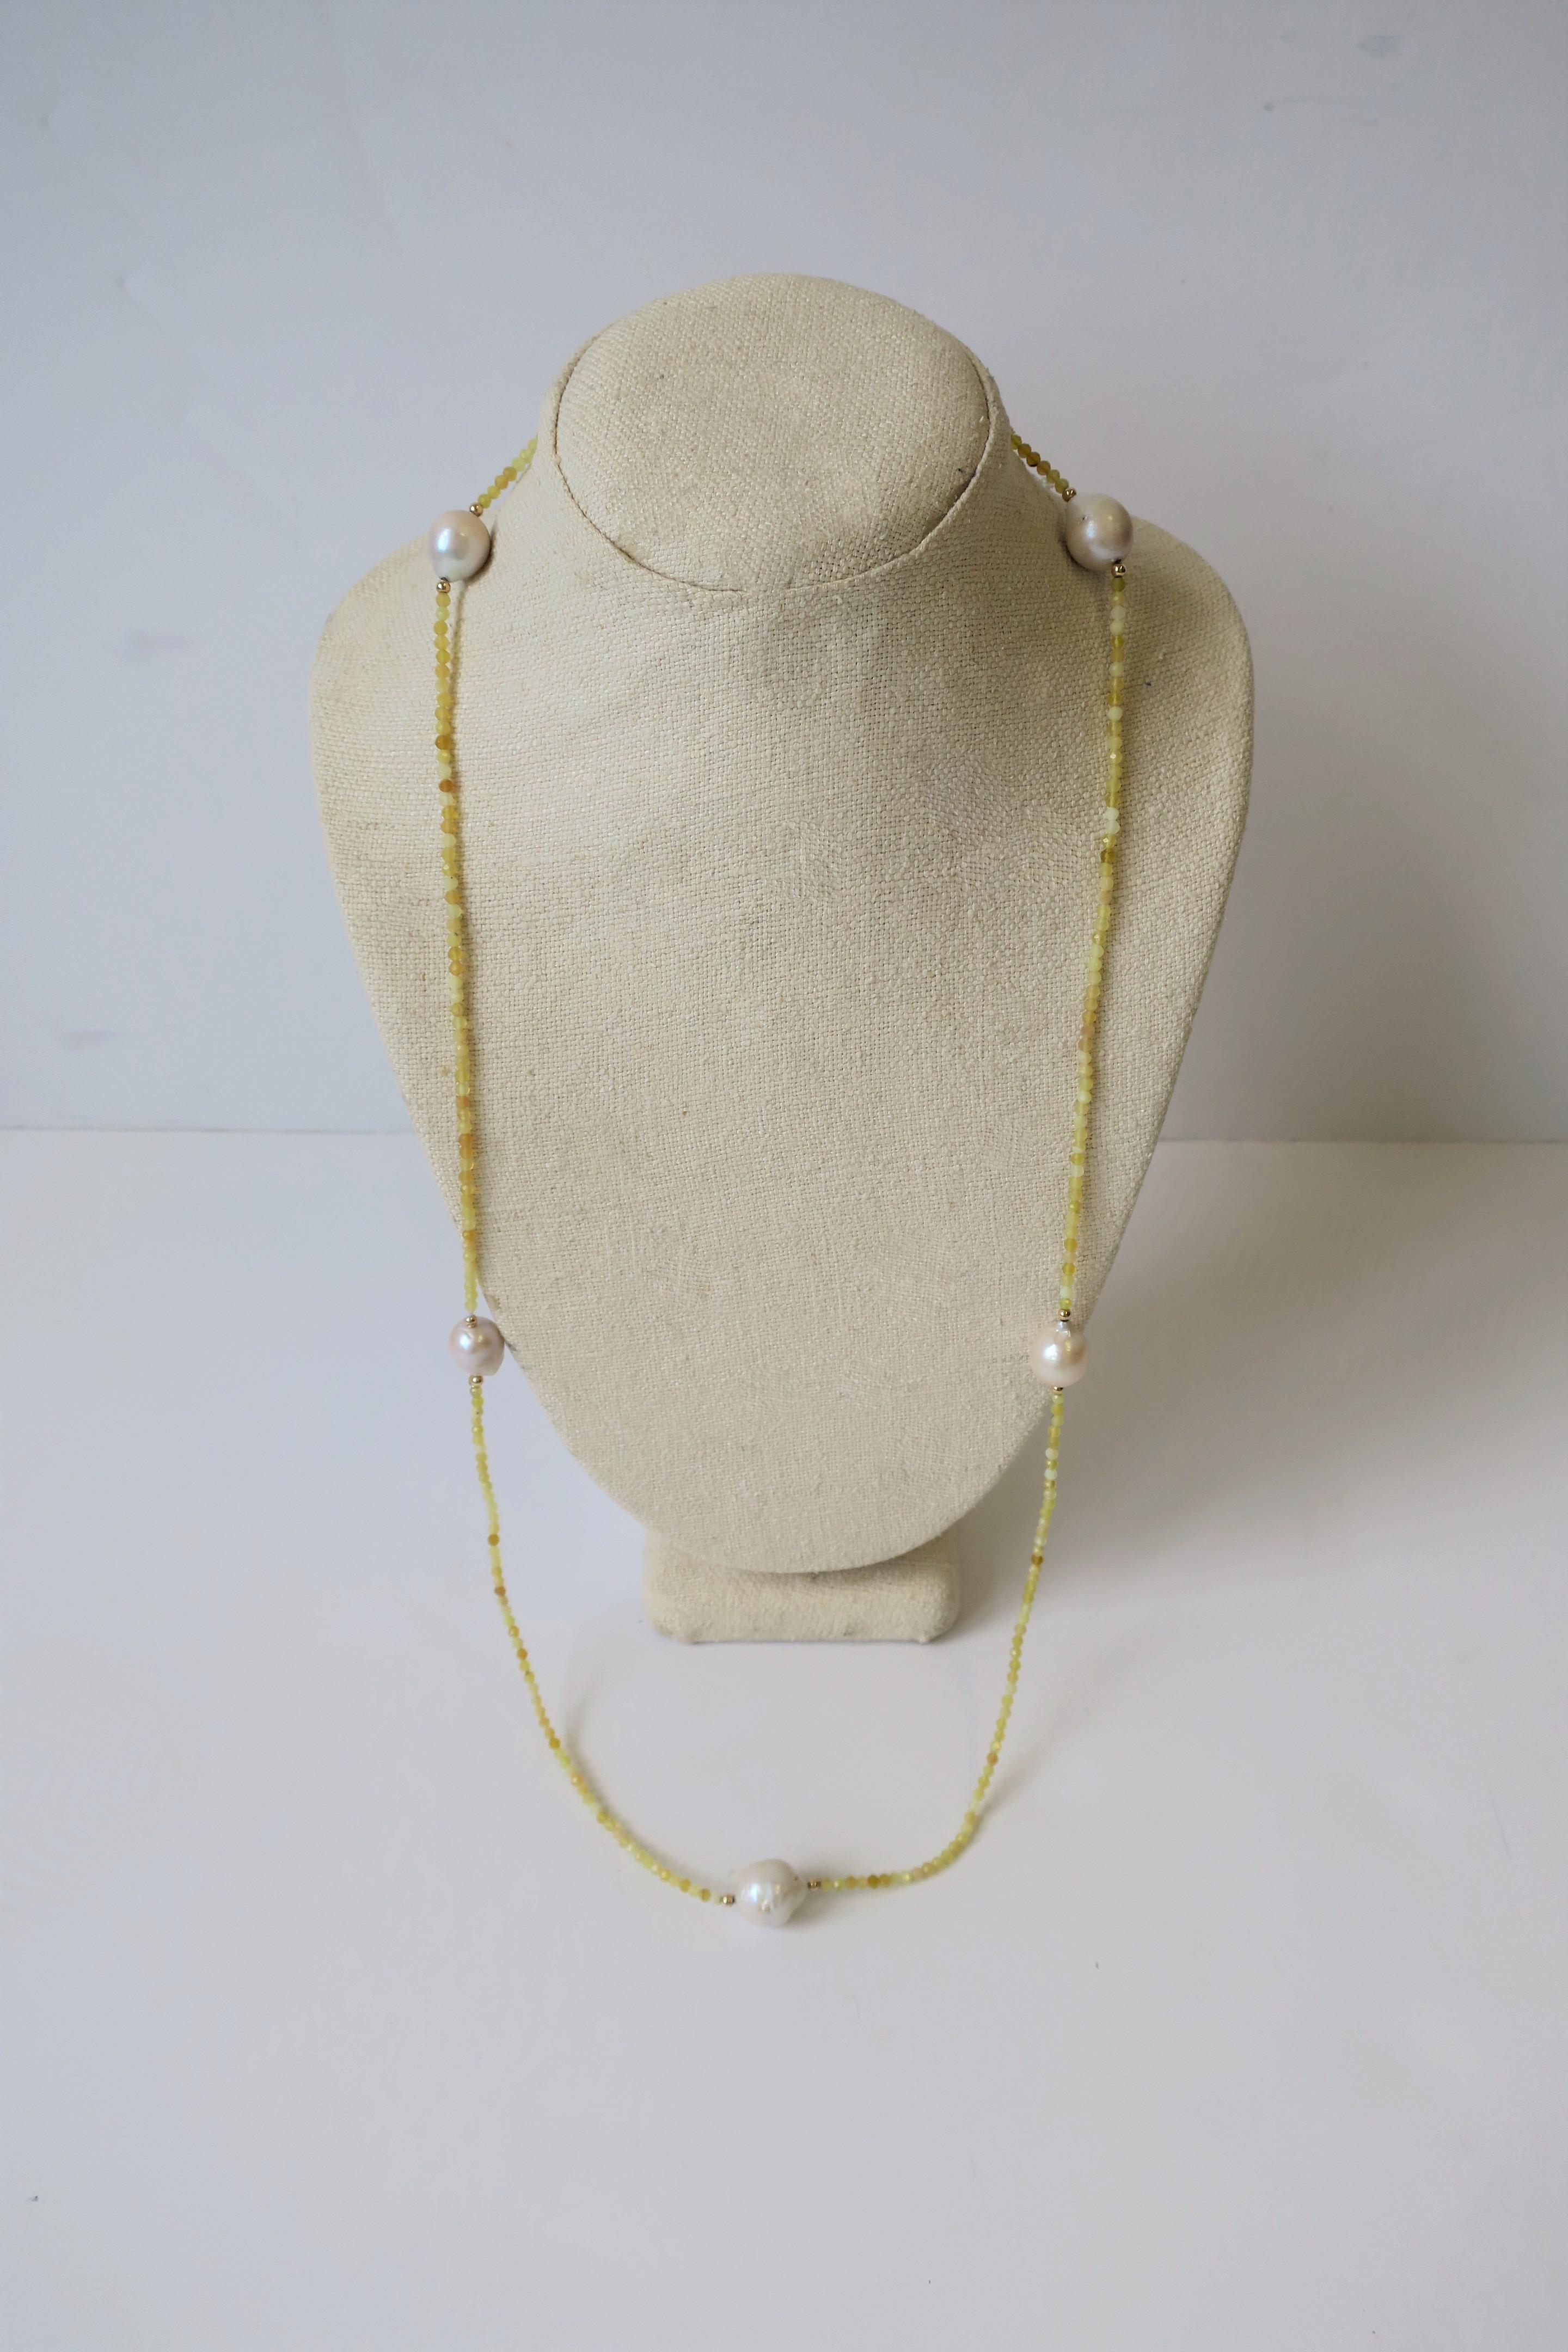 A very beautiful long necklace of real, relatively large, 5 white baroque freshwater pearls, 14-karat gold beads and yellow tumbled stone beads. Dimensions: 34.5